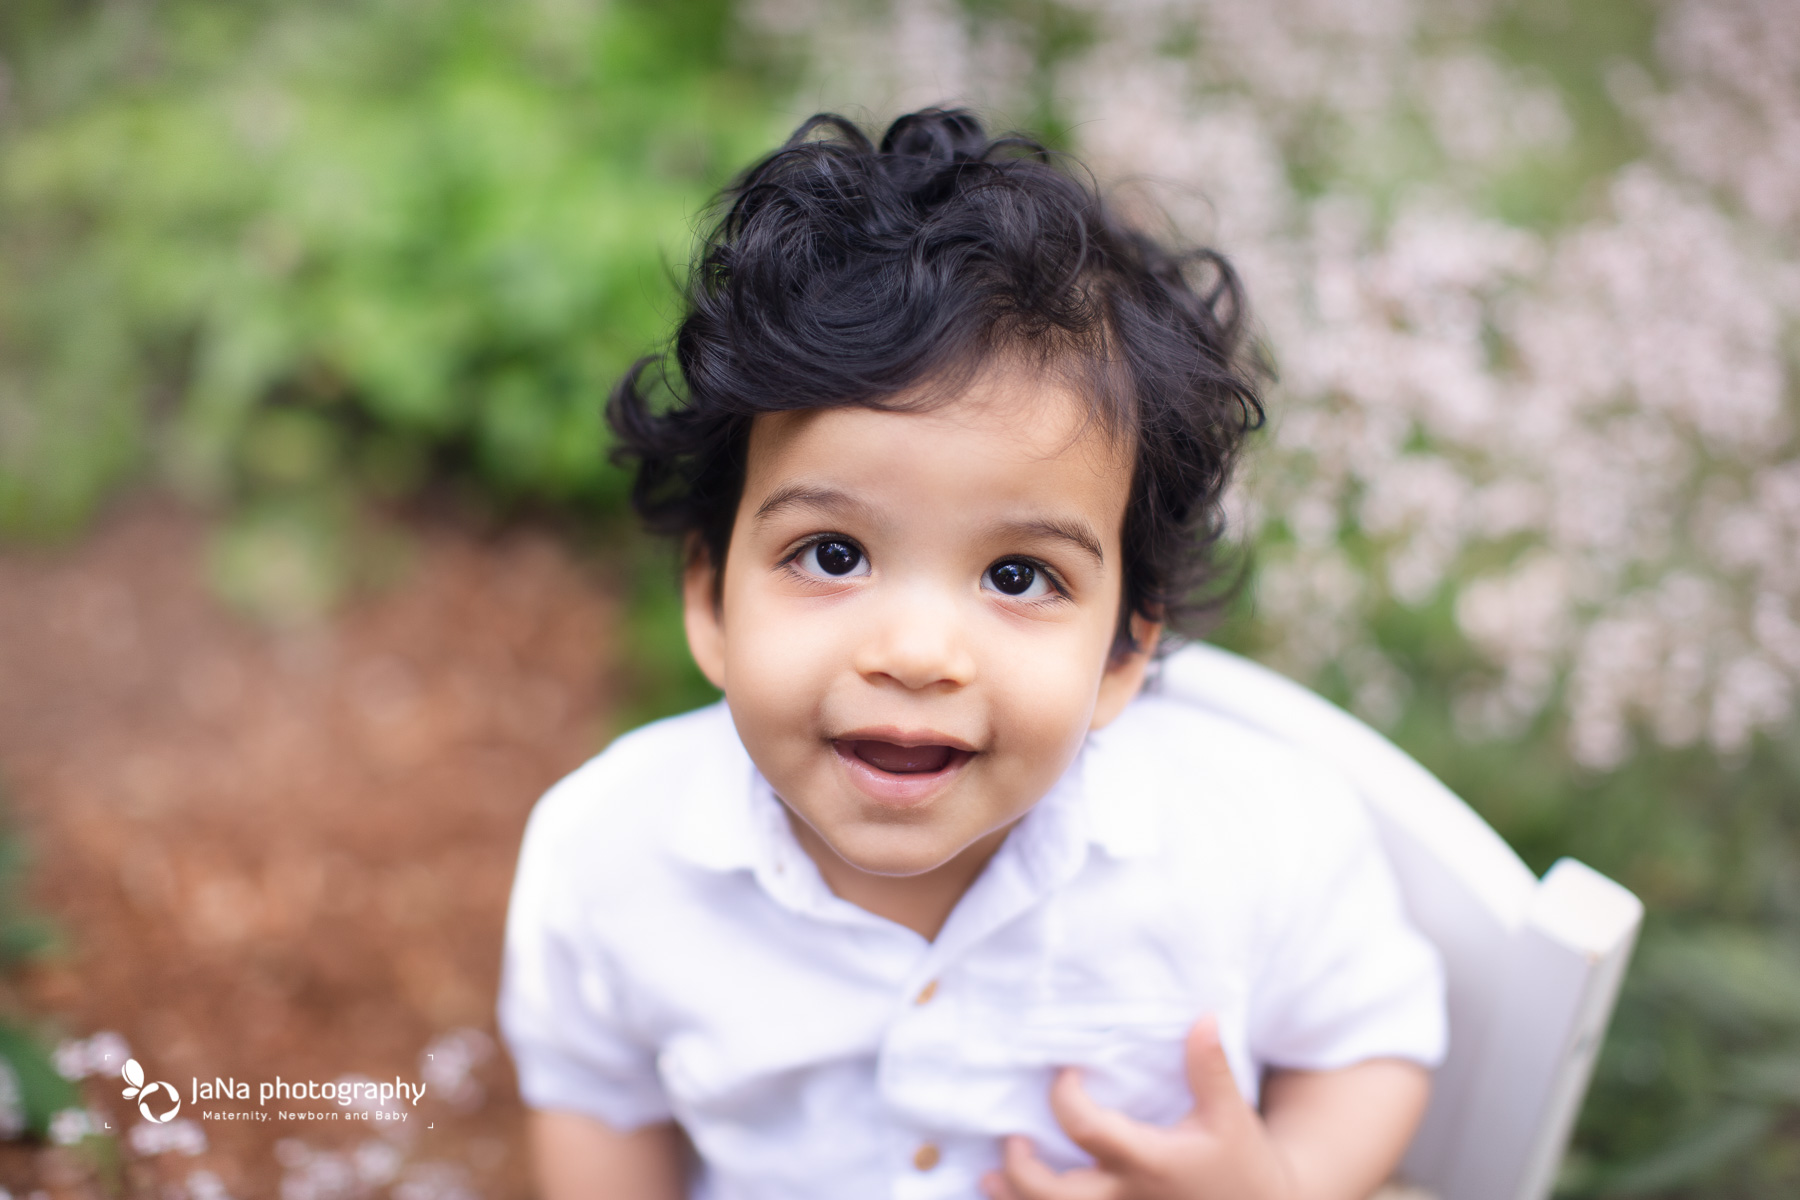 Vancouver outdoor family photography - one year old